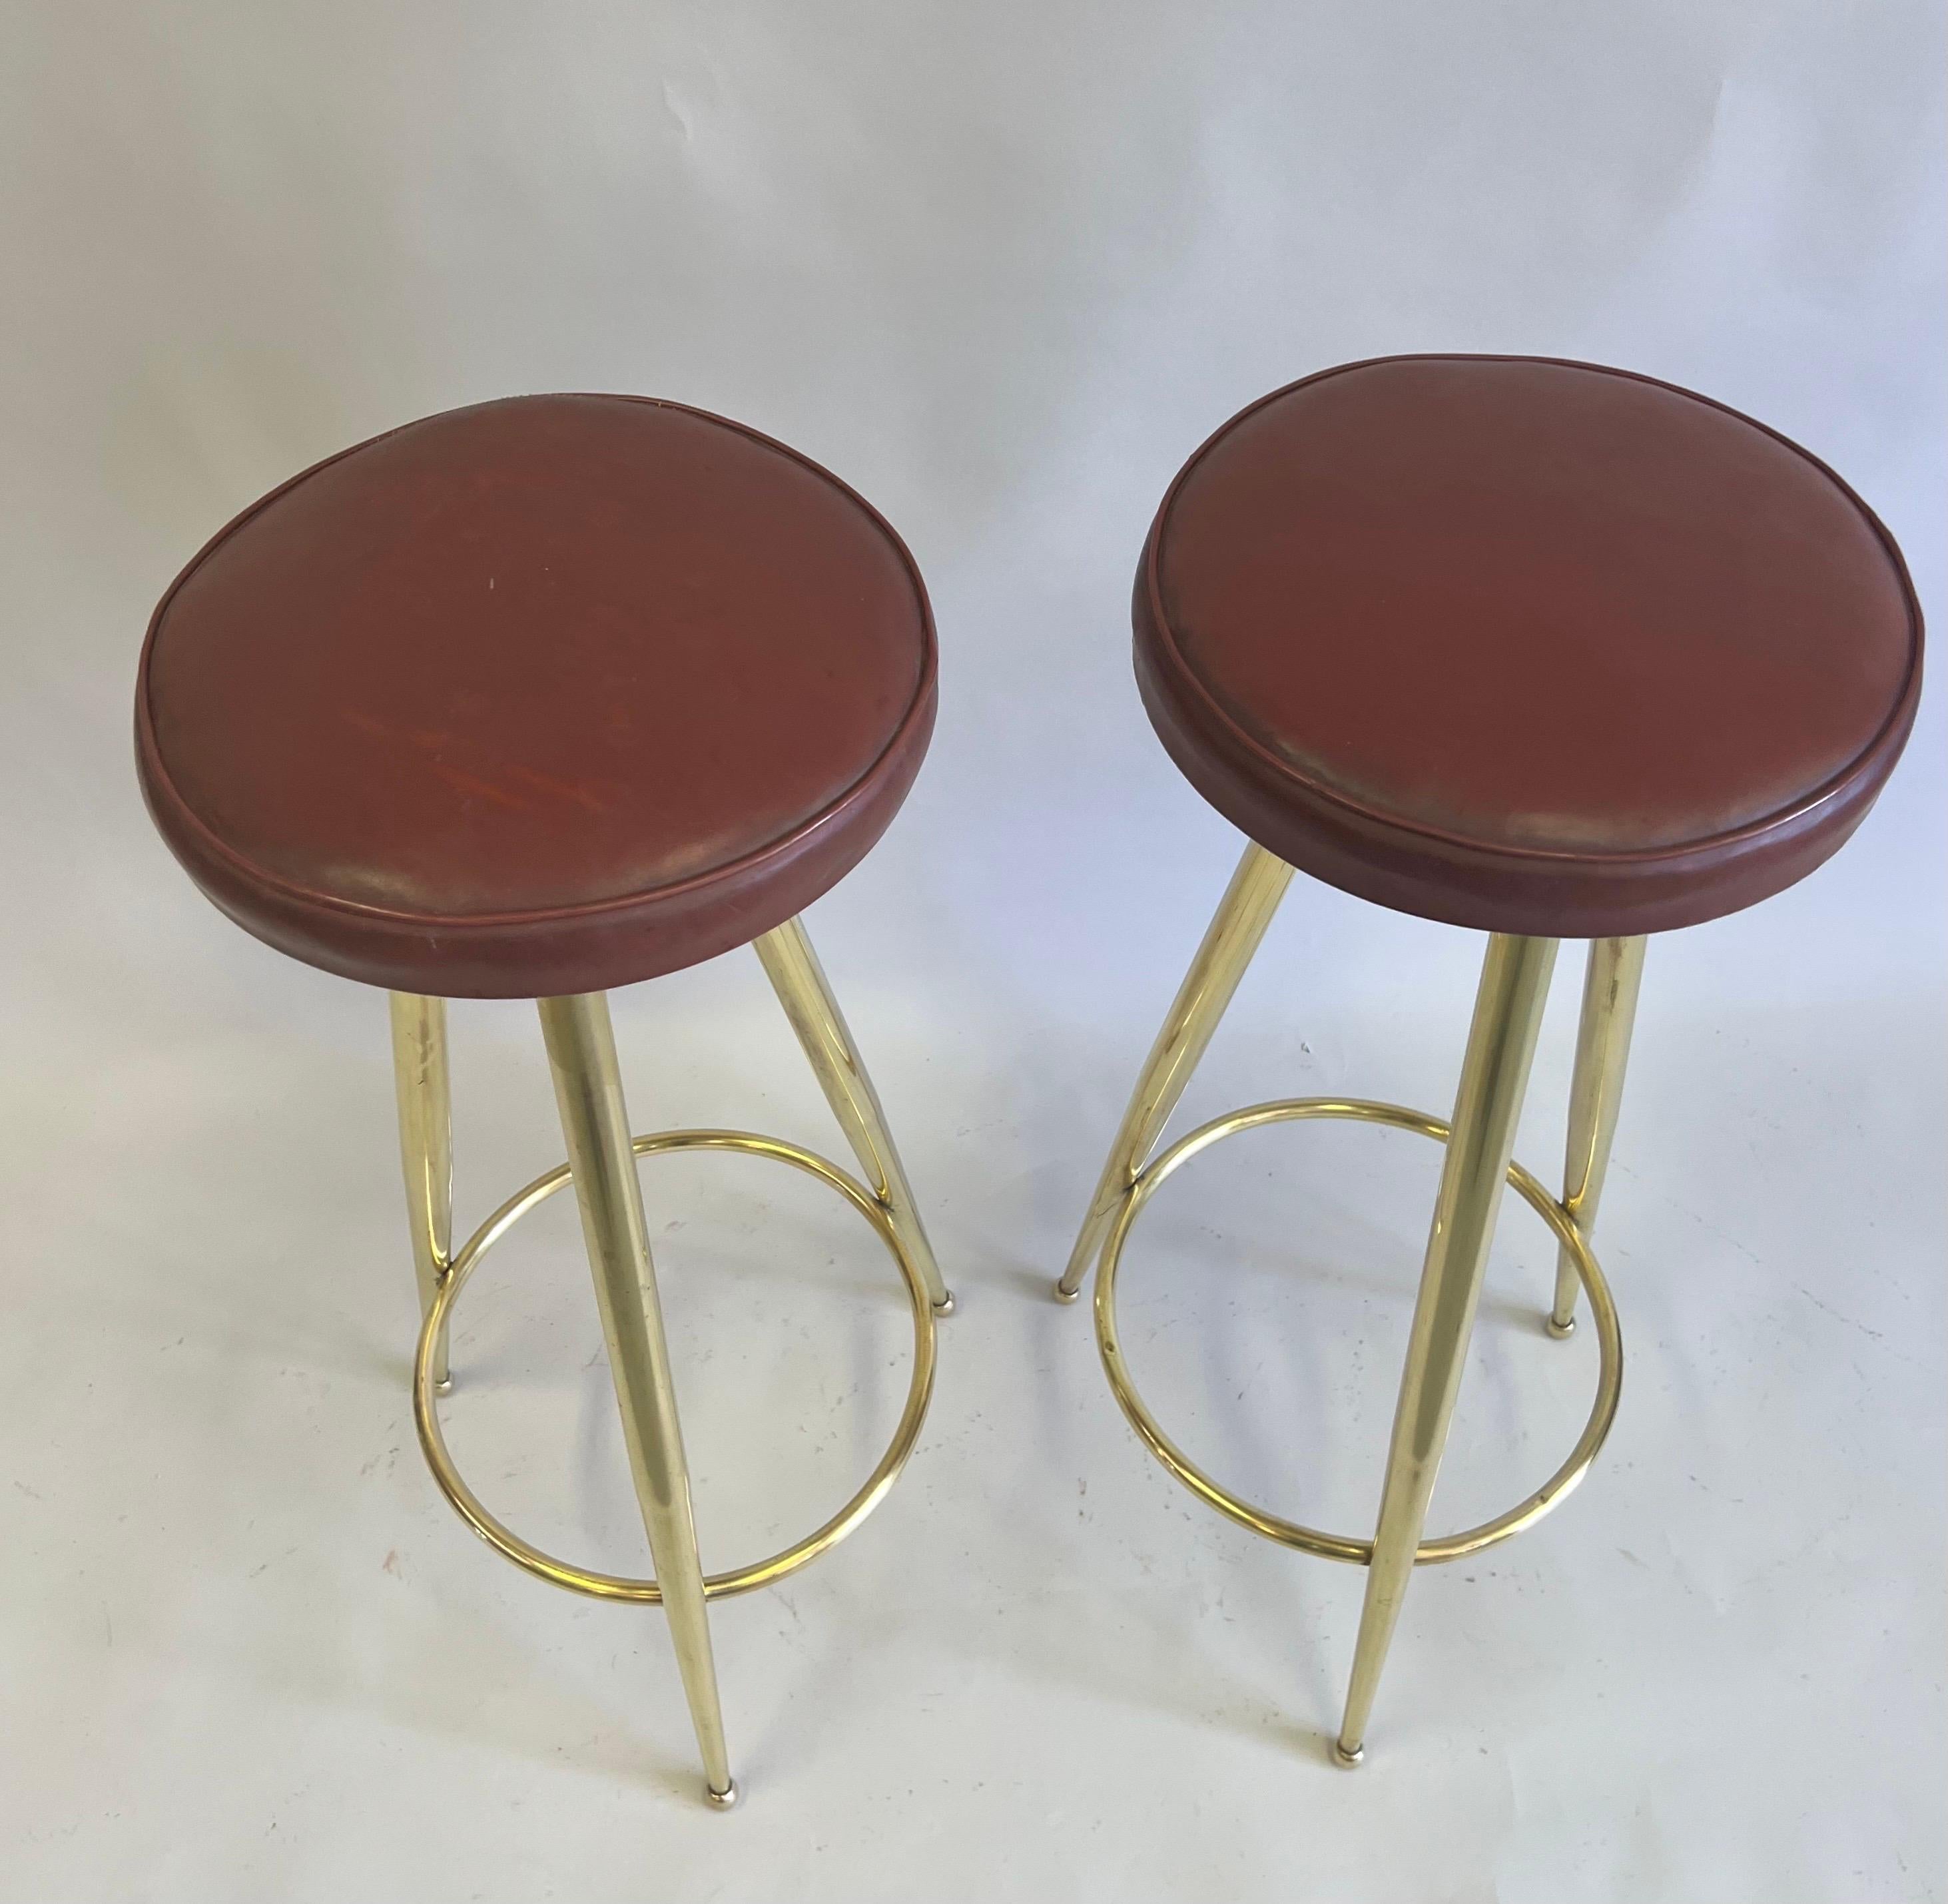 Pair of Italian Mid-Century Modern Brass Bar Stools by Gio Ponti In Good Condition For Sale In New York, NY